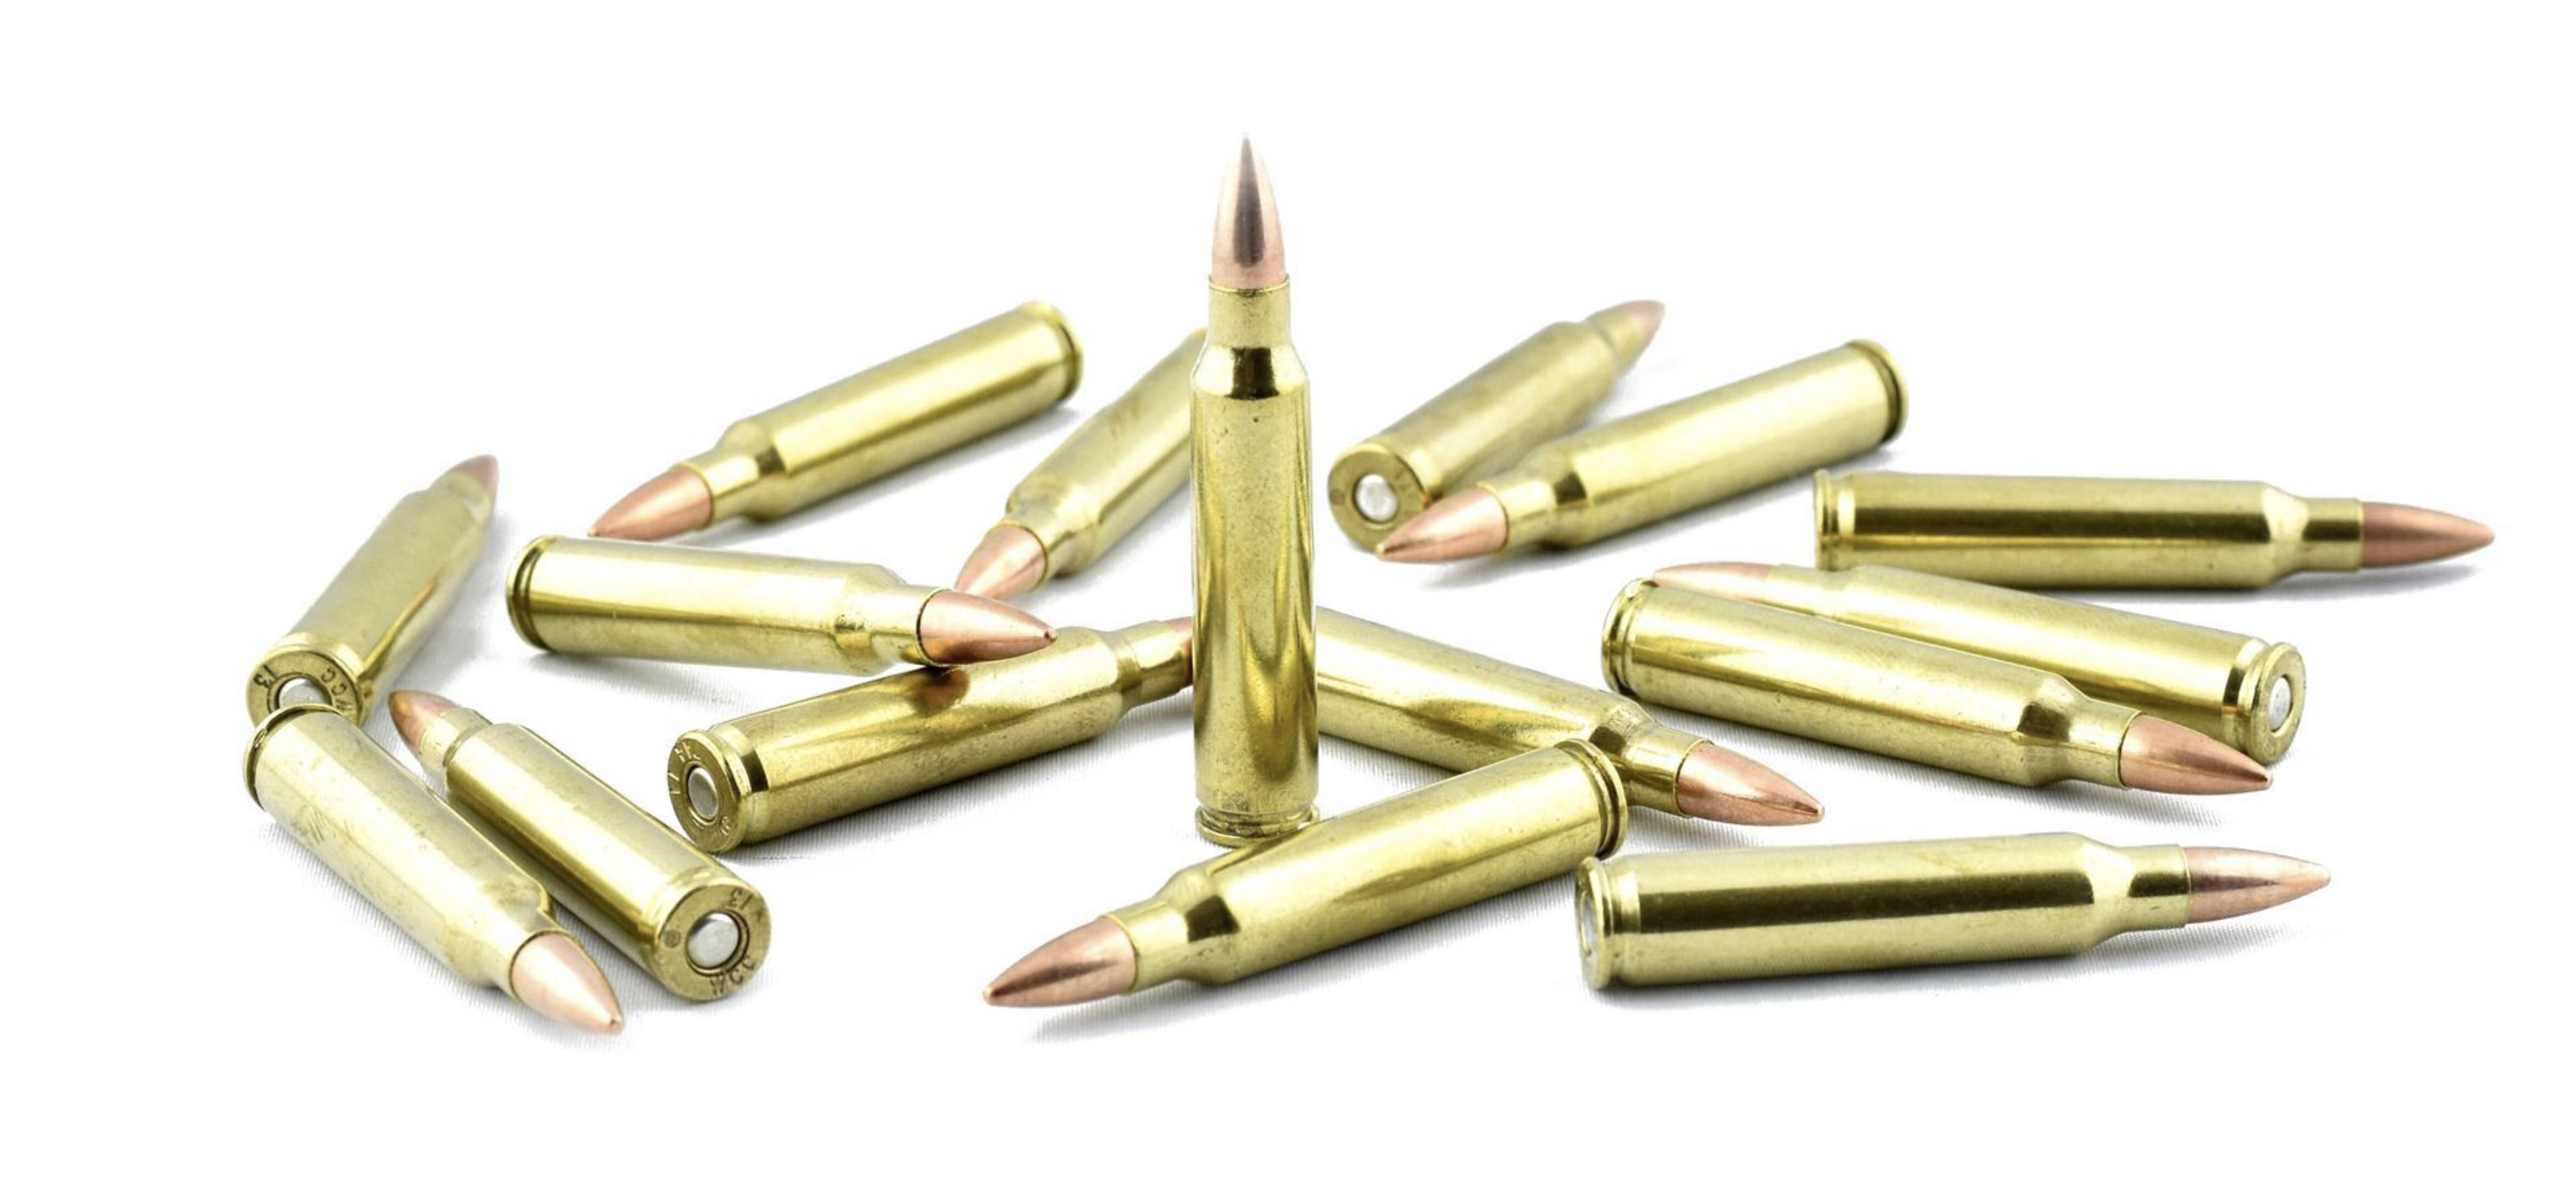 5.56mm rounds